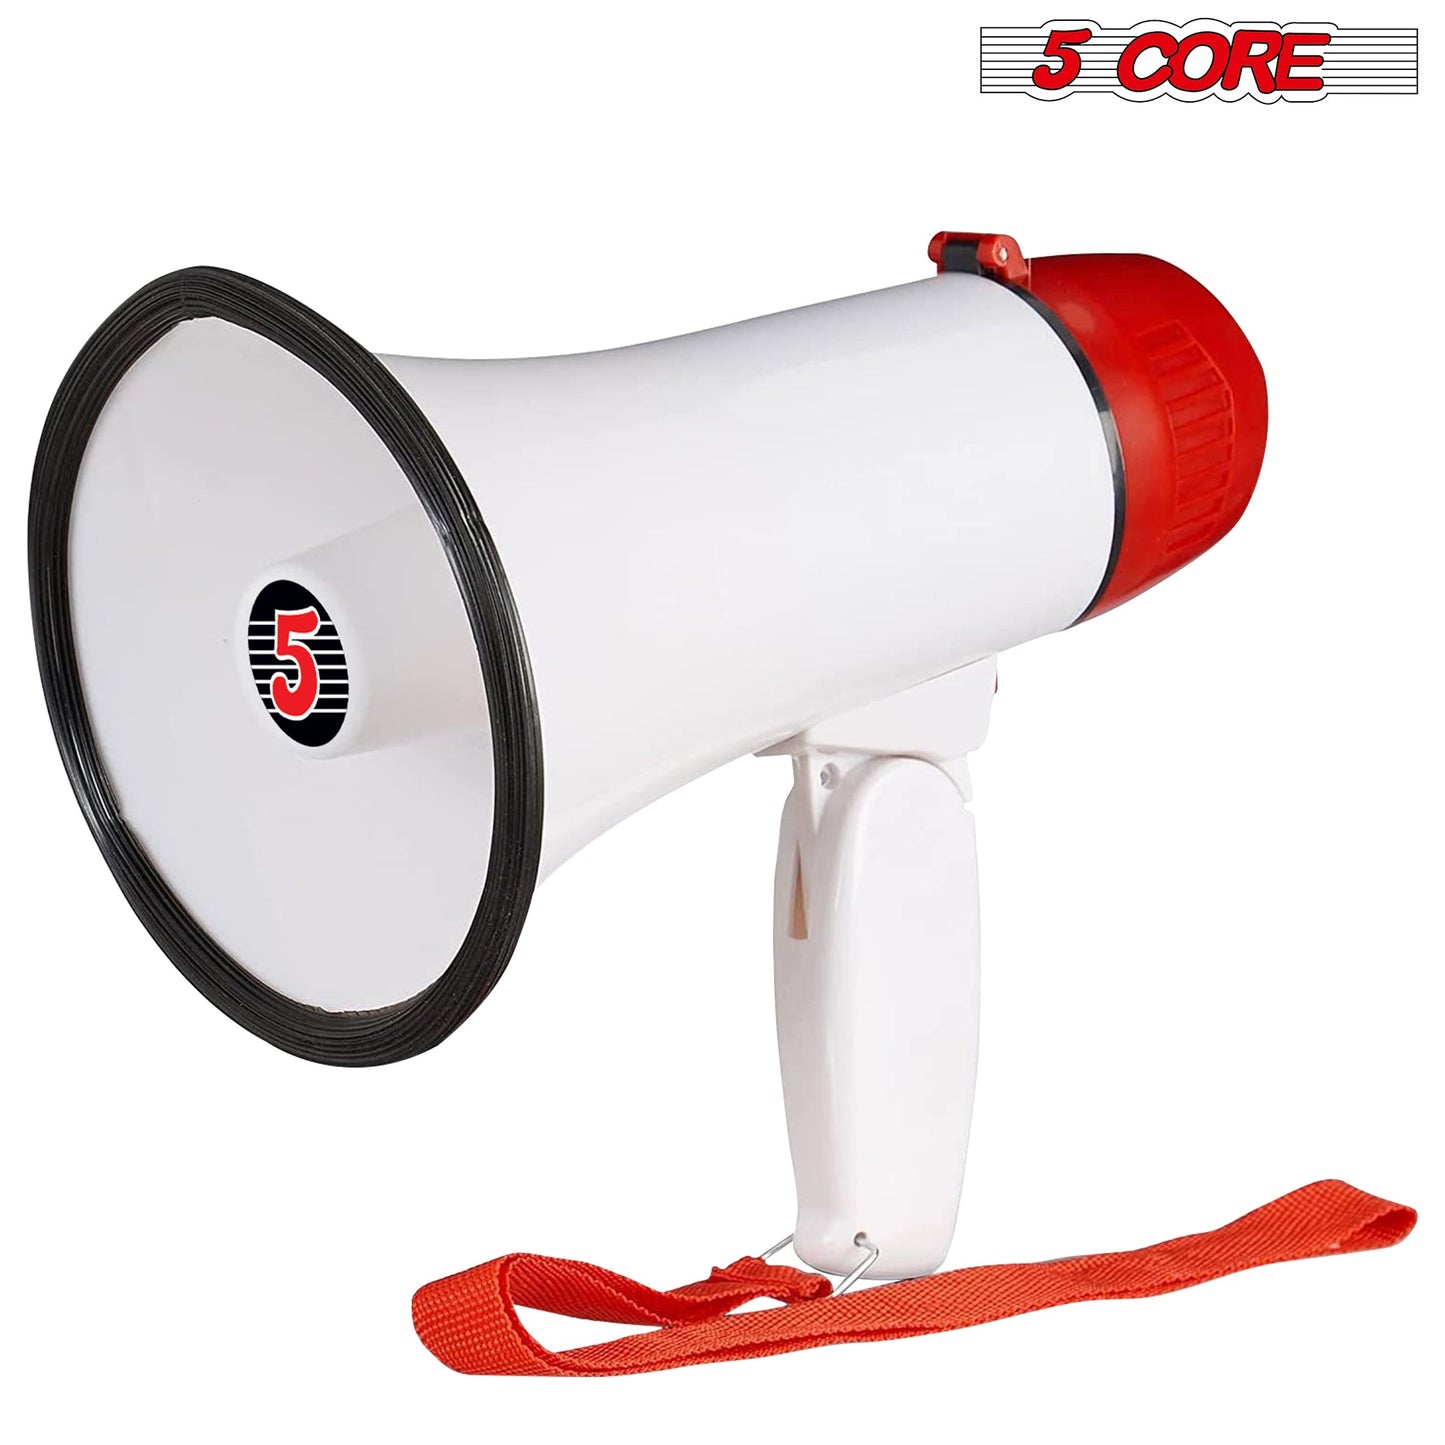 Megaphone Speakers Amplifier White-Red | 10W Cheer Megaphone with Recording, Volume Control, and Siren Alarm| Battery Operated and Foldable Handle | Bullhorn Speaker with Strap- 6R